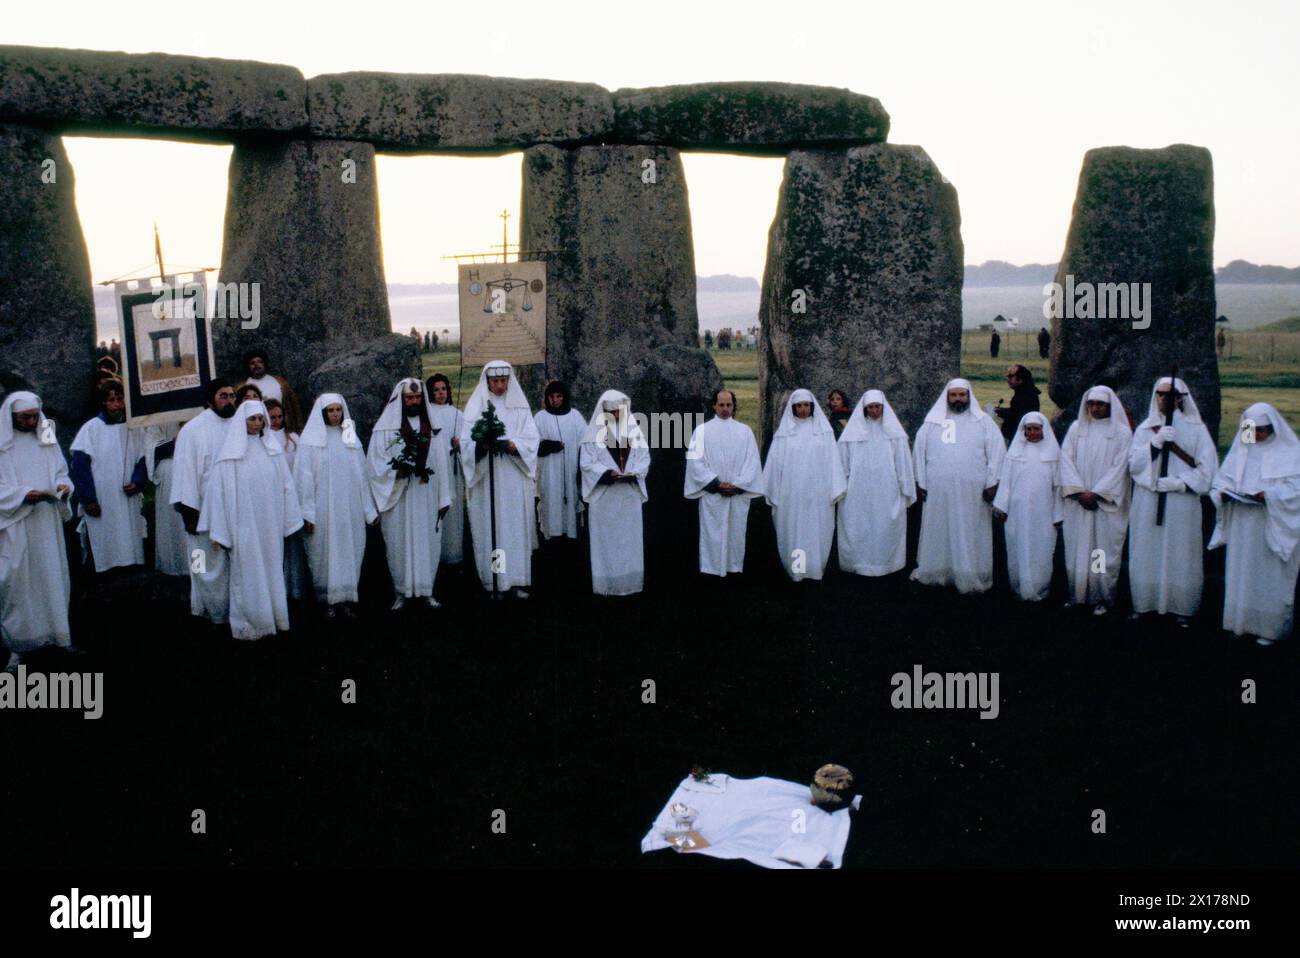 Druids celebration at the summer solstice at Stonehenge Wiltshire June 21st 1970s. Dawn they form a circle within the henge prehistoric monument and perform traditional rituals and rites circa 1975 UK Salisbury Plain, England HOMER SYKES Stock Photo